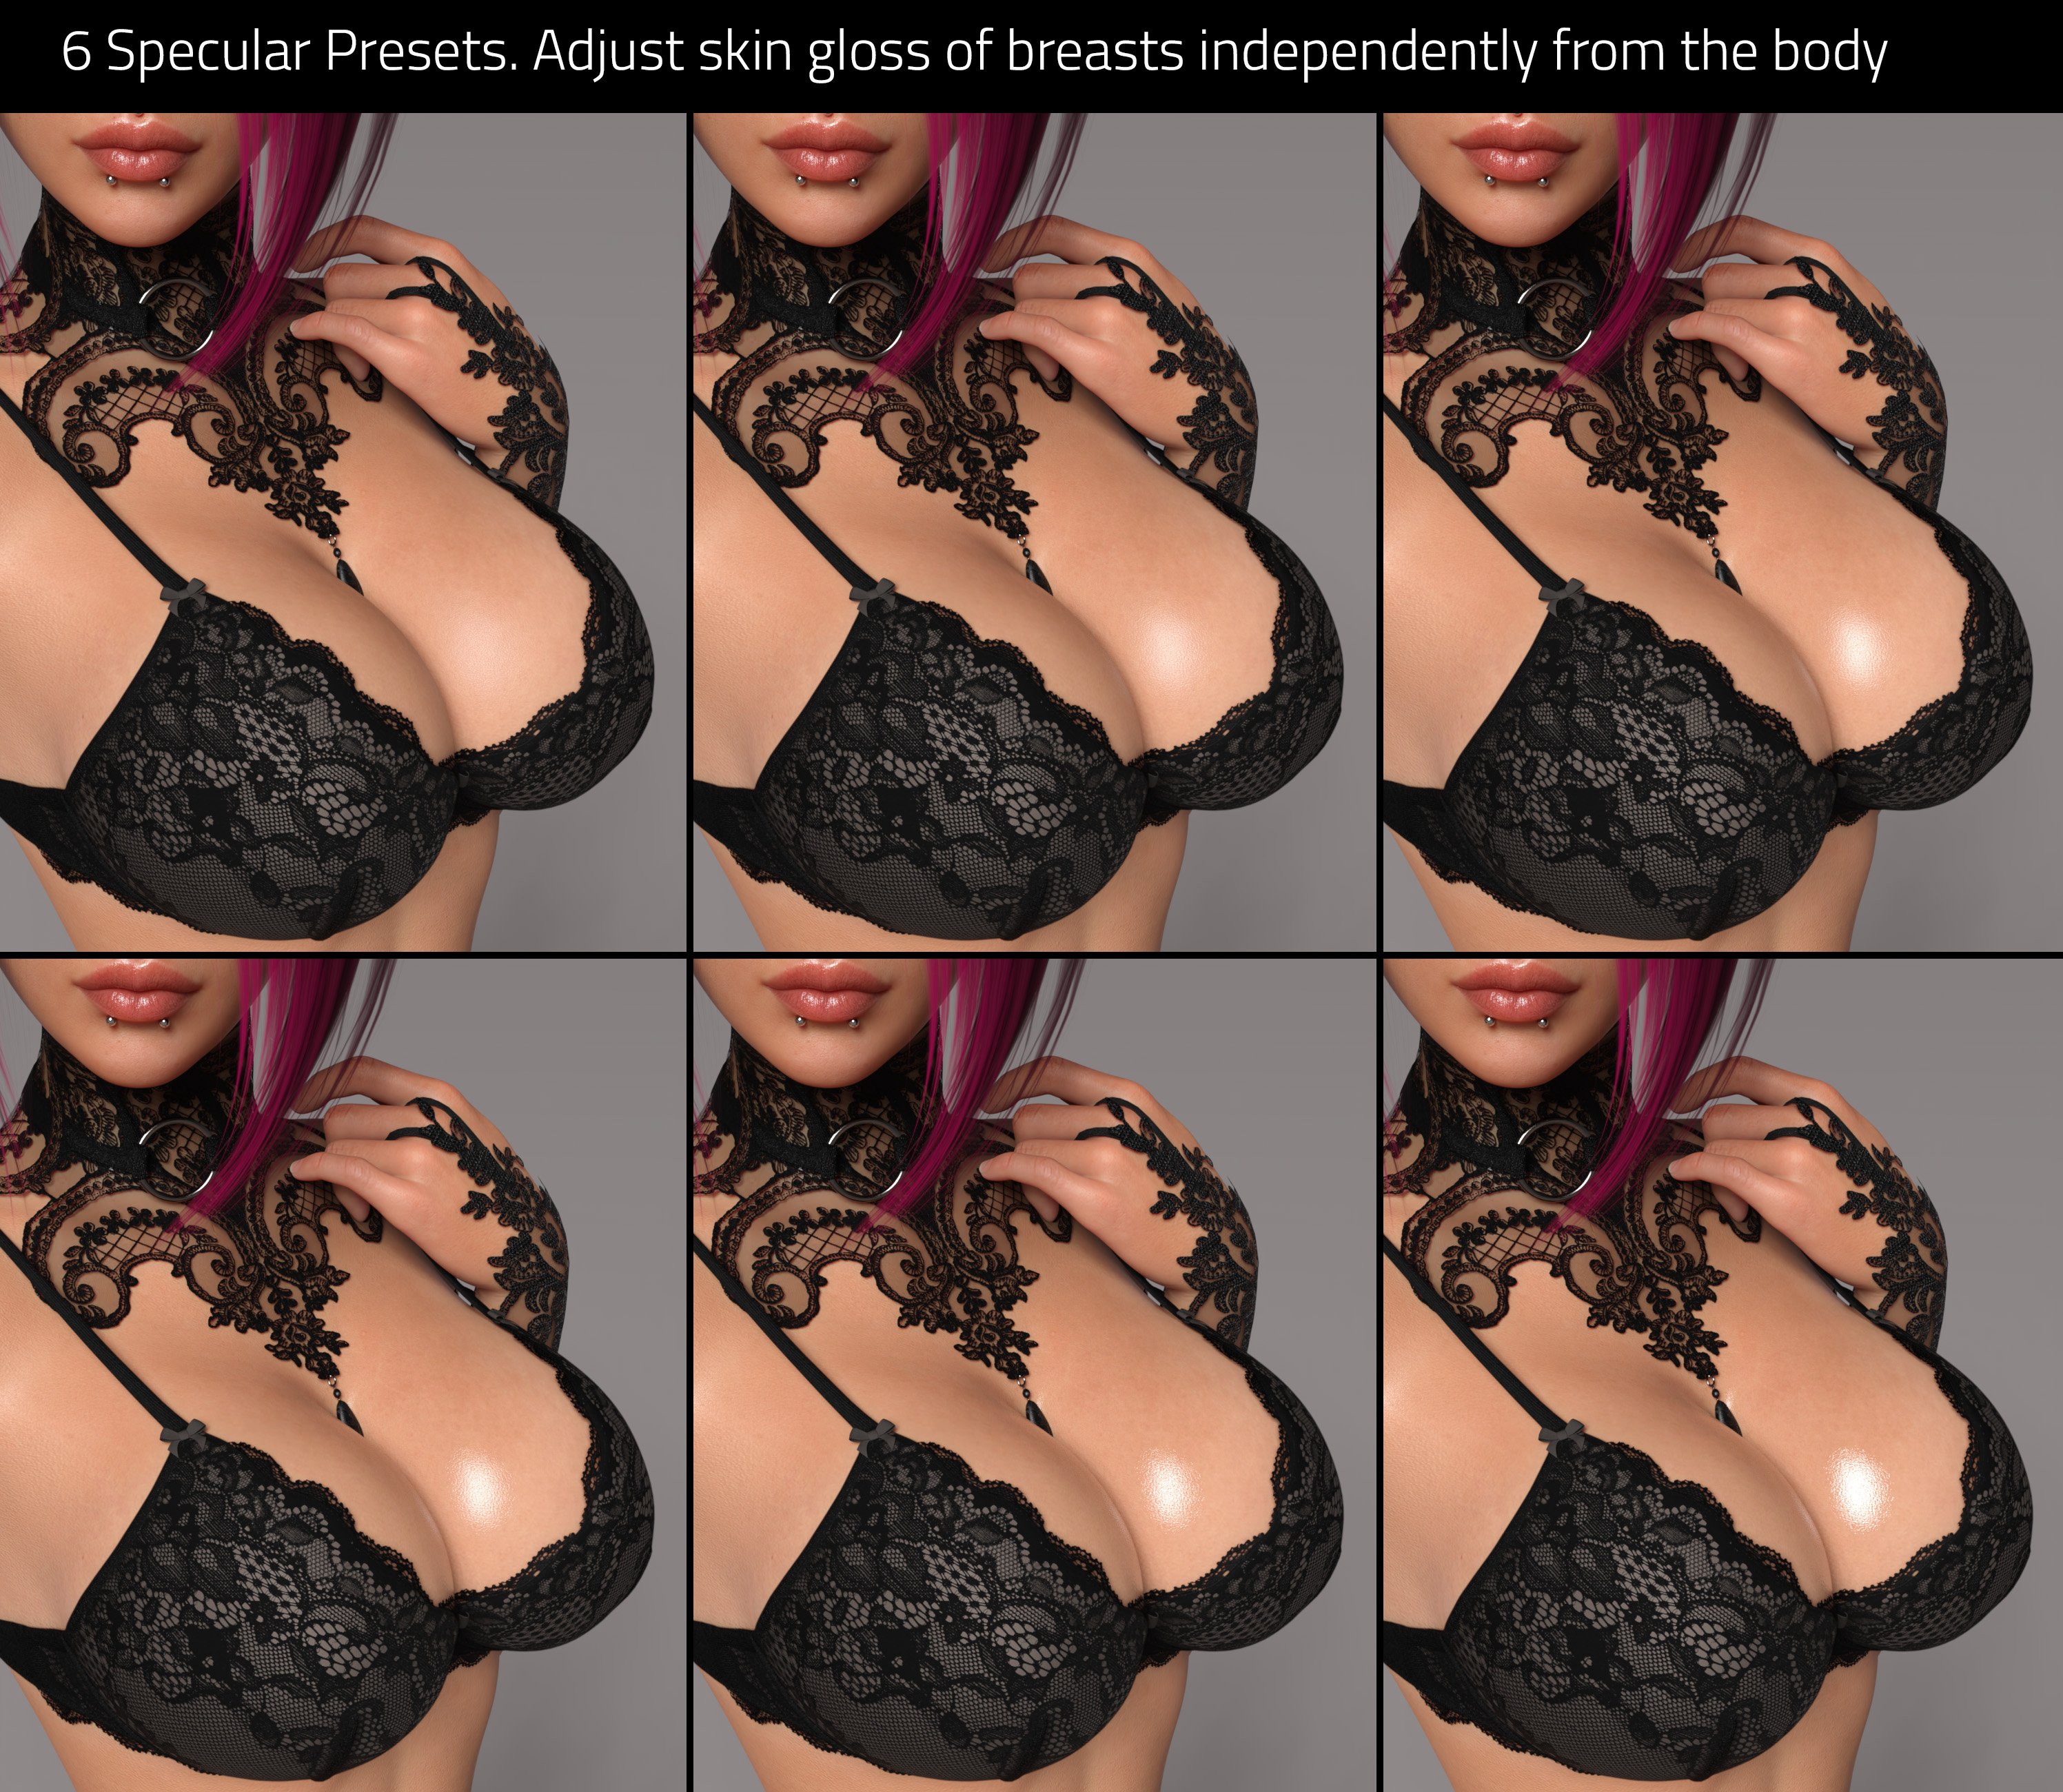 Breast Utilities 2 for Genesis 8 and 8.1 Females by: Soto, 3D Models by Daz 3D